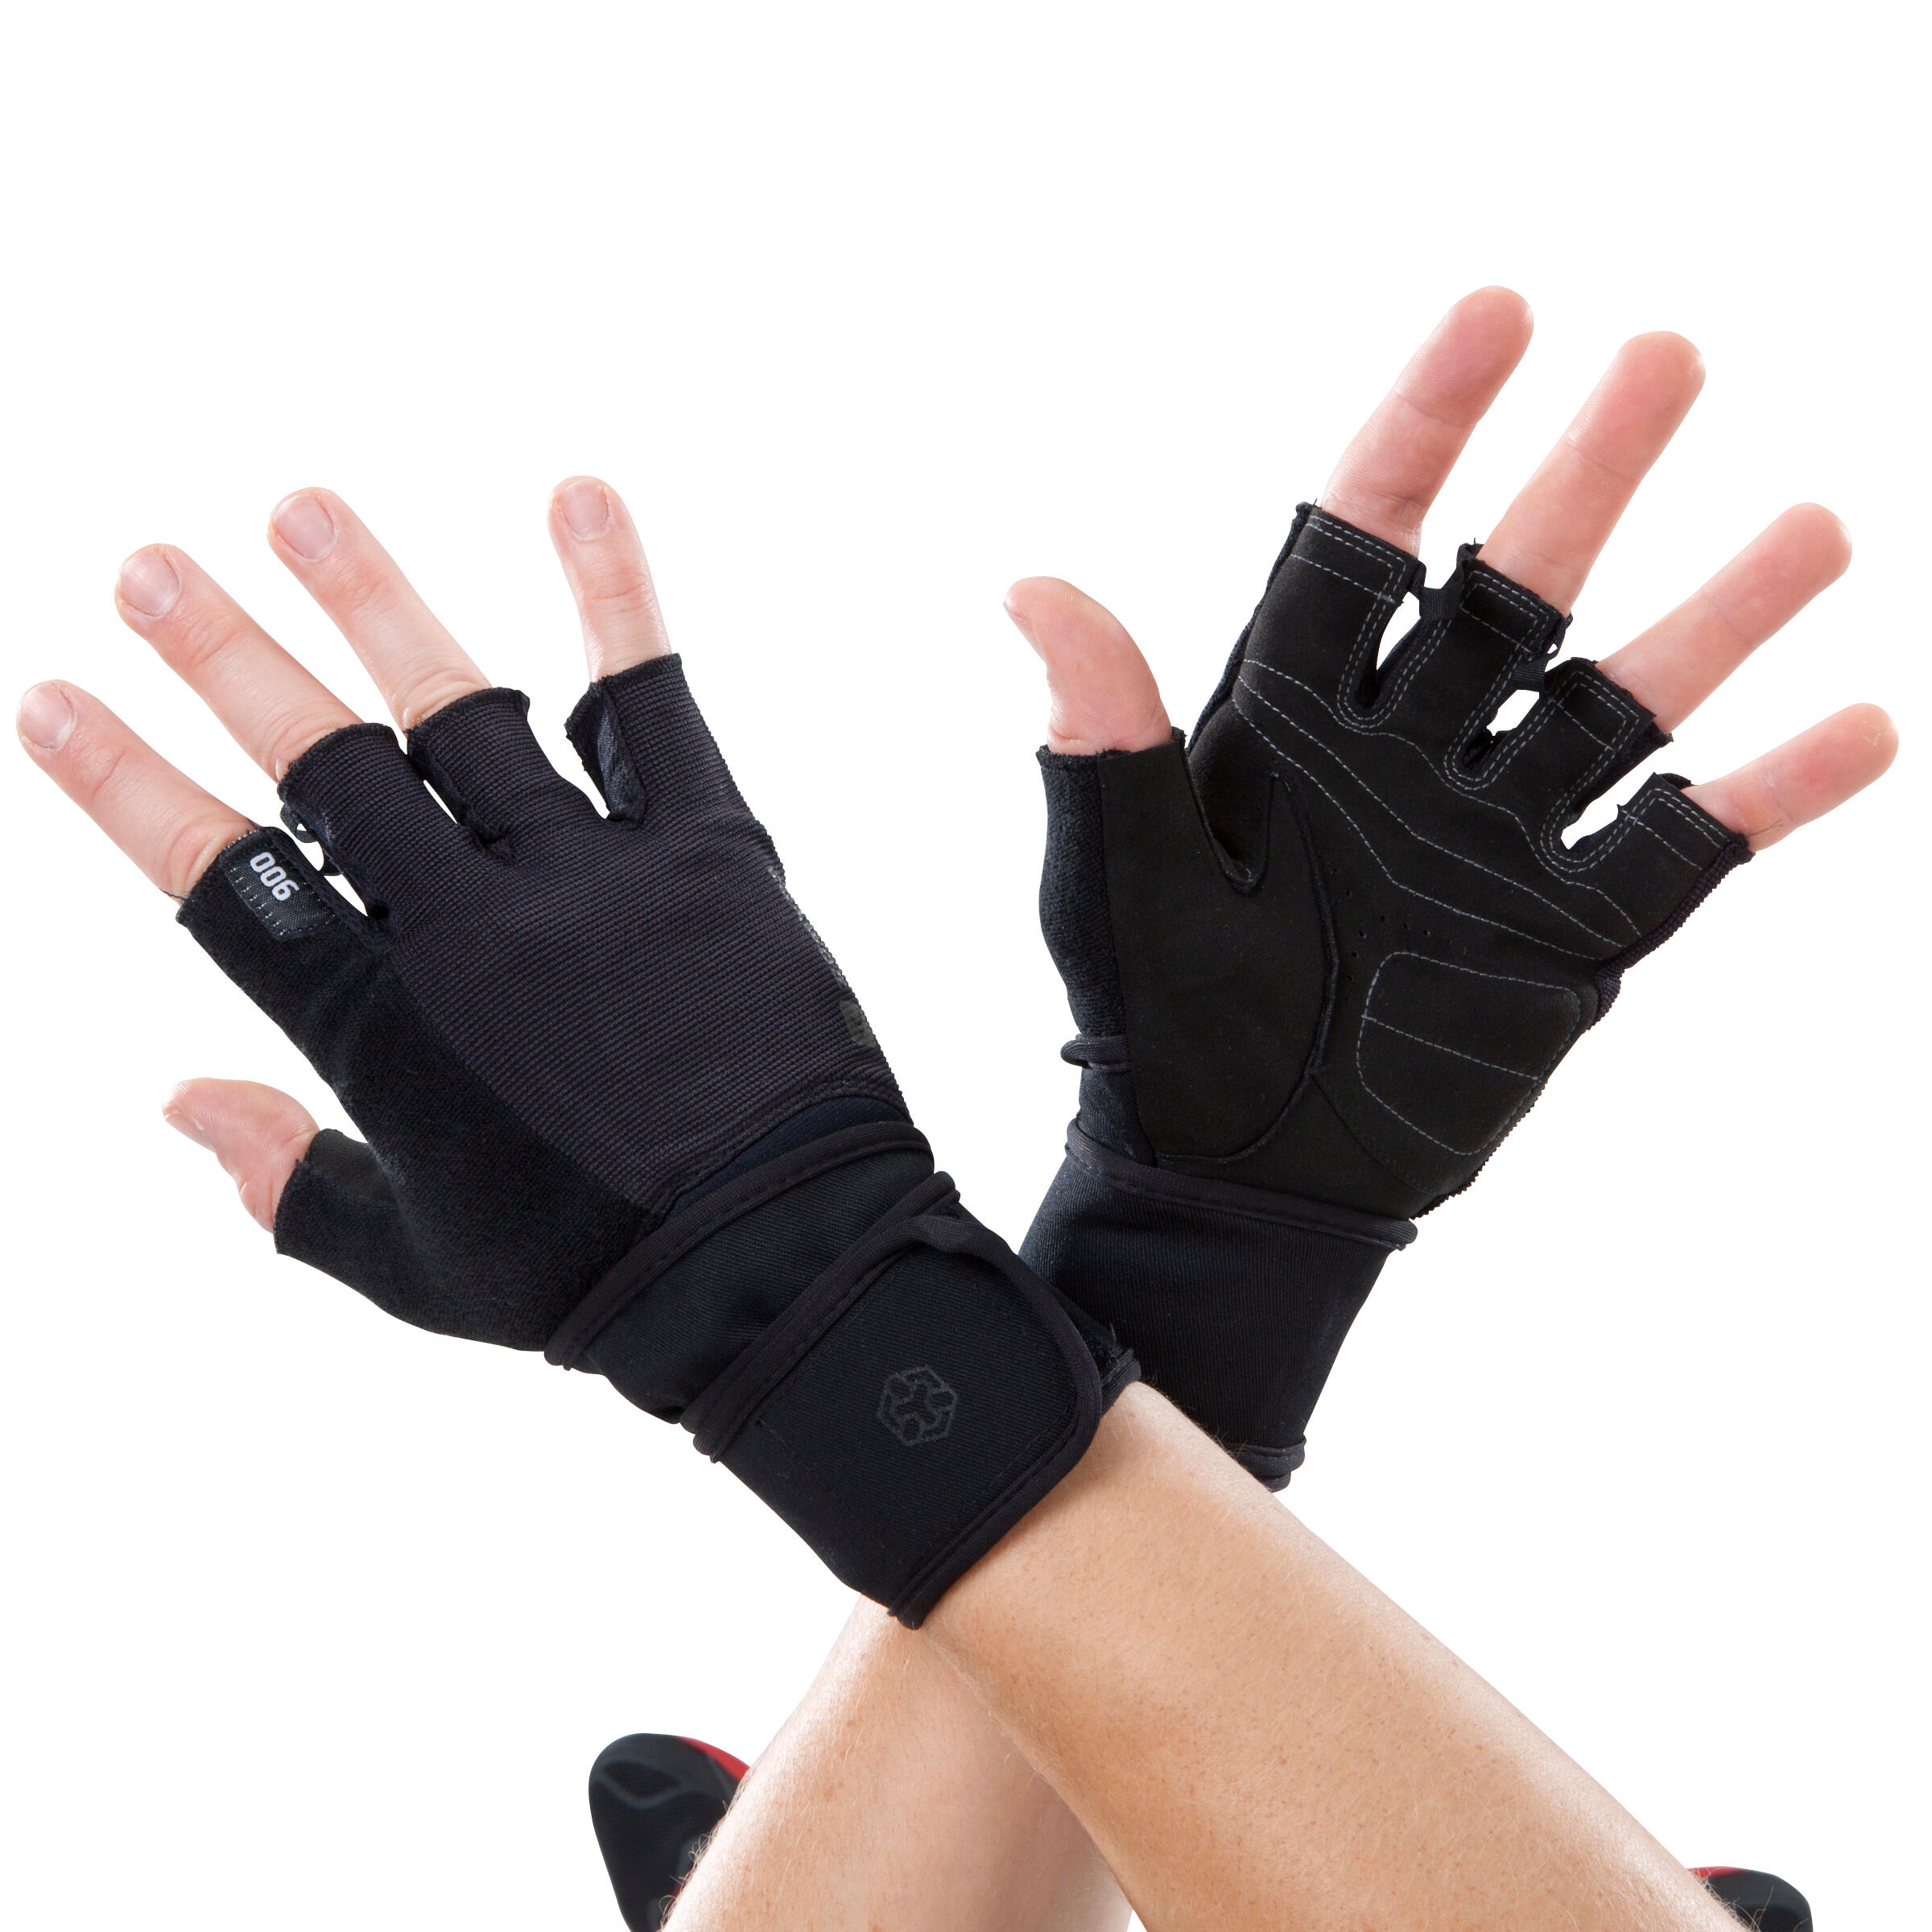 900 Weight Training Glove with Double Rip-Tab Cuff - Black/Grey 1/10